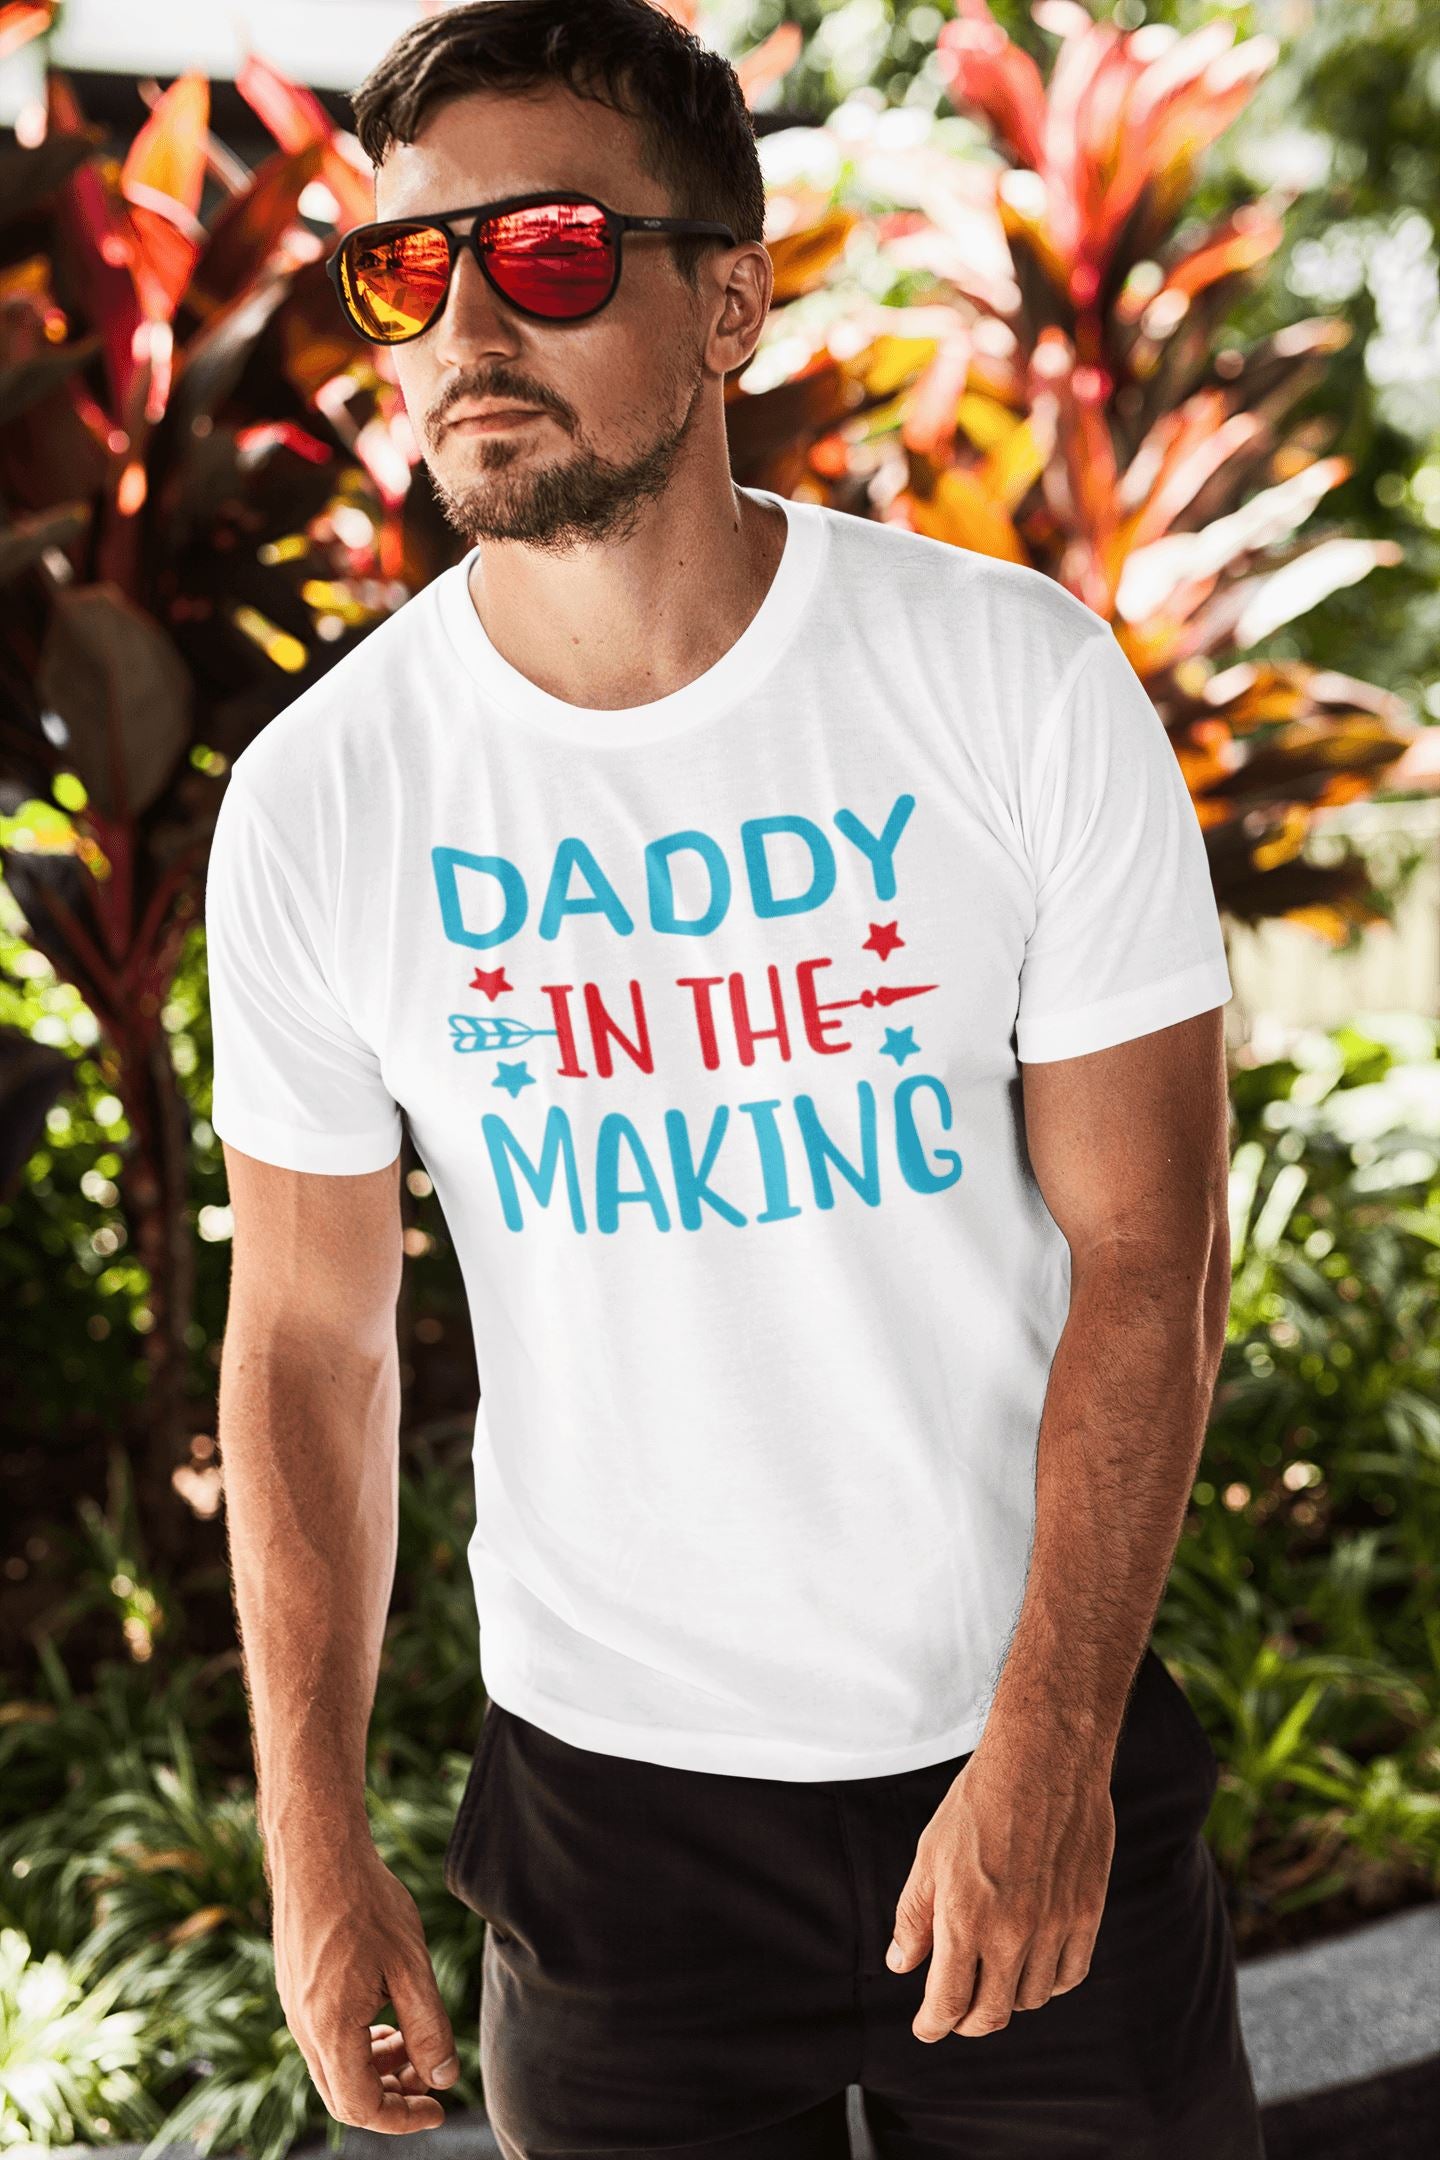 Daddy in the Making Special T Shirt for Men - Catch My Drift India  black, clothing, dad, father, made in india, parents, shirt, t shirt, trending, tshirt, white